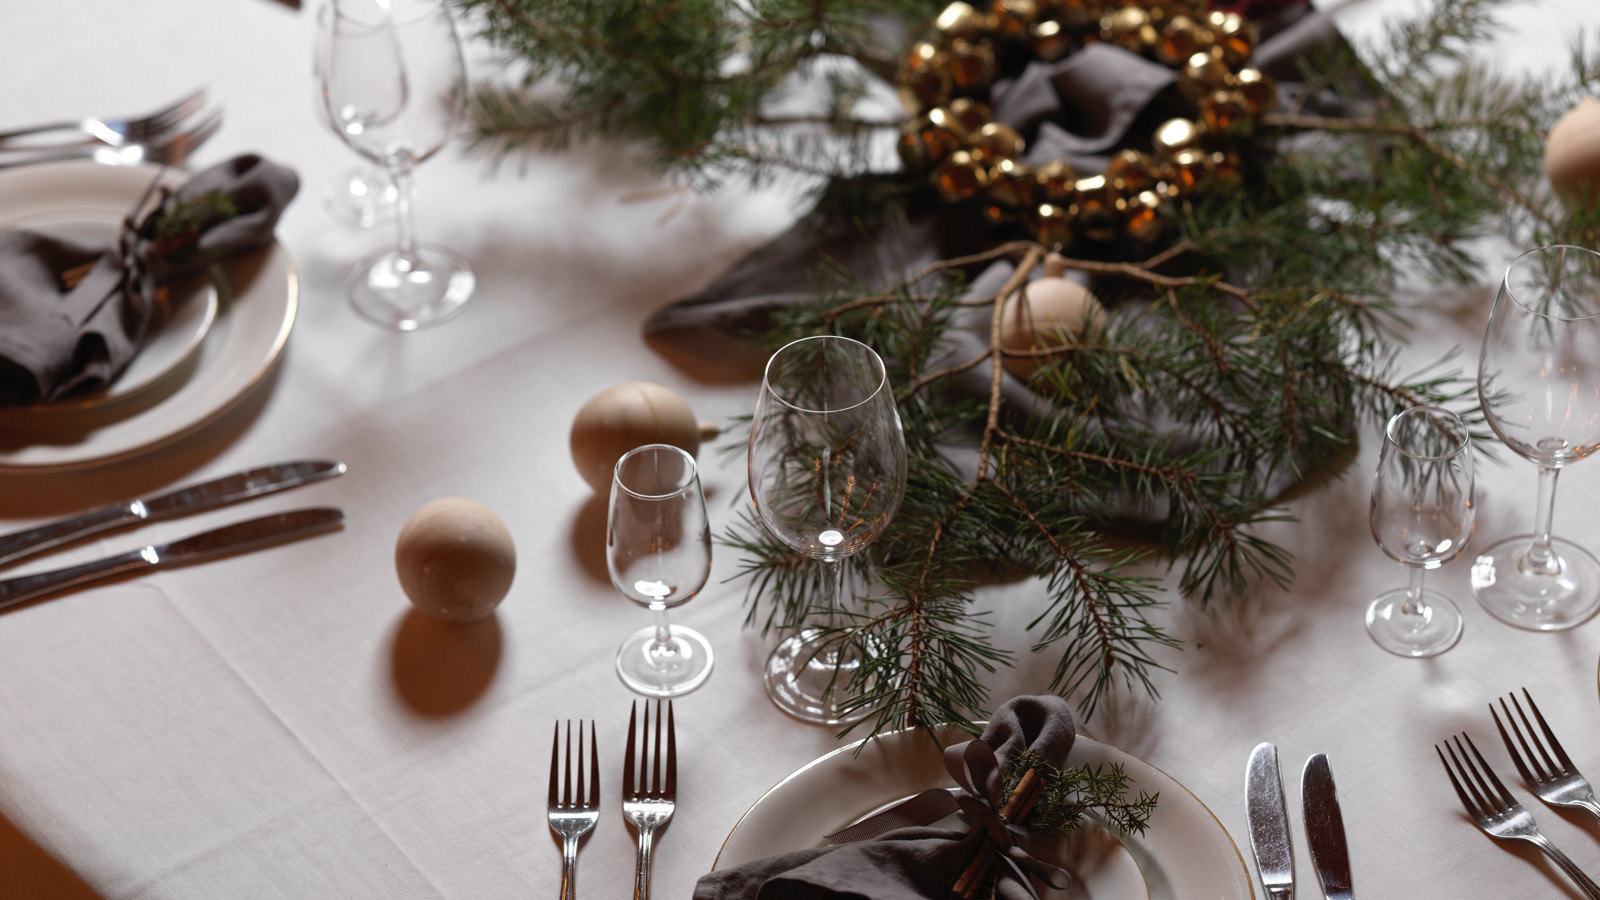 Beautiful Christmas table setting in green, brown and gold